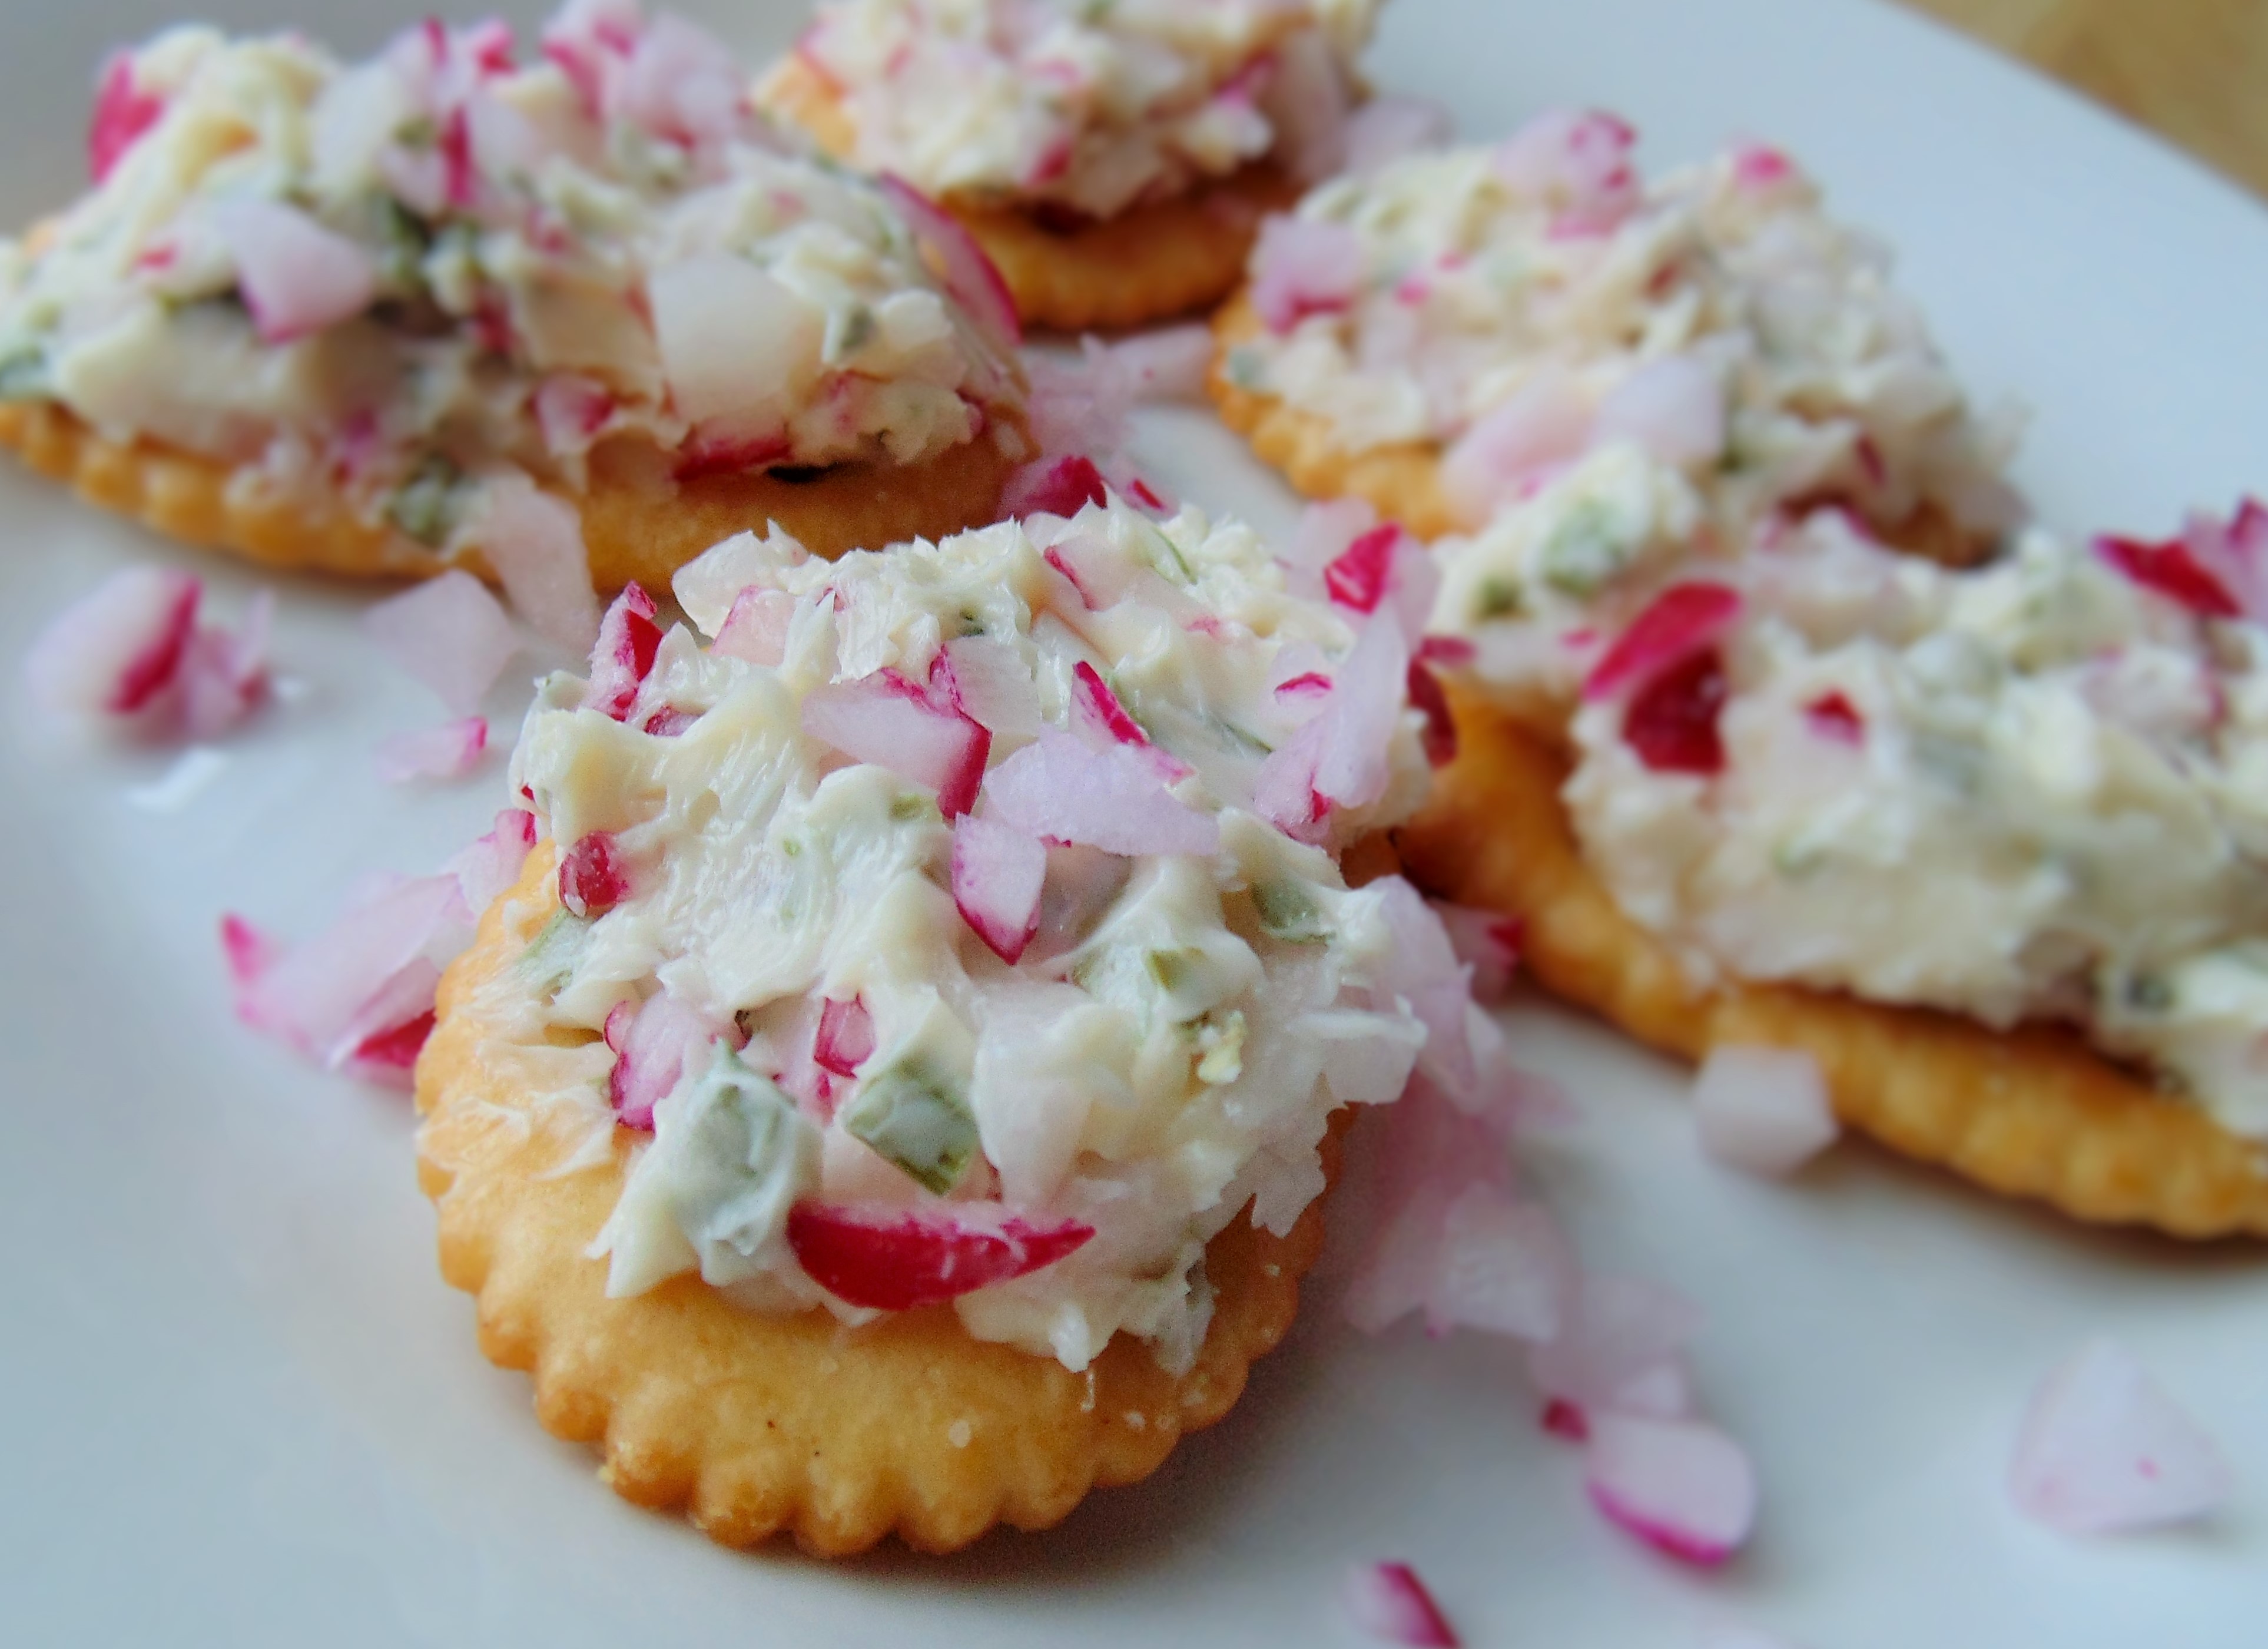 Radish and Butter Spread